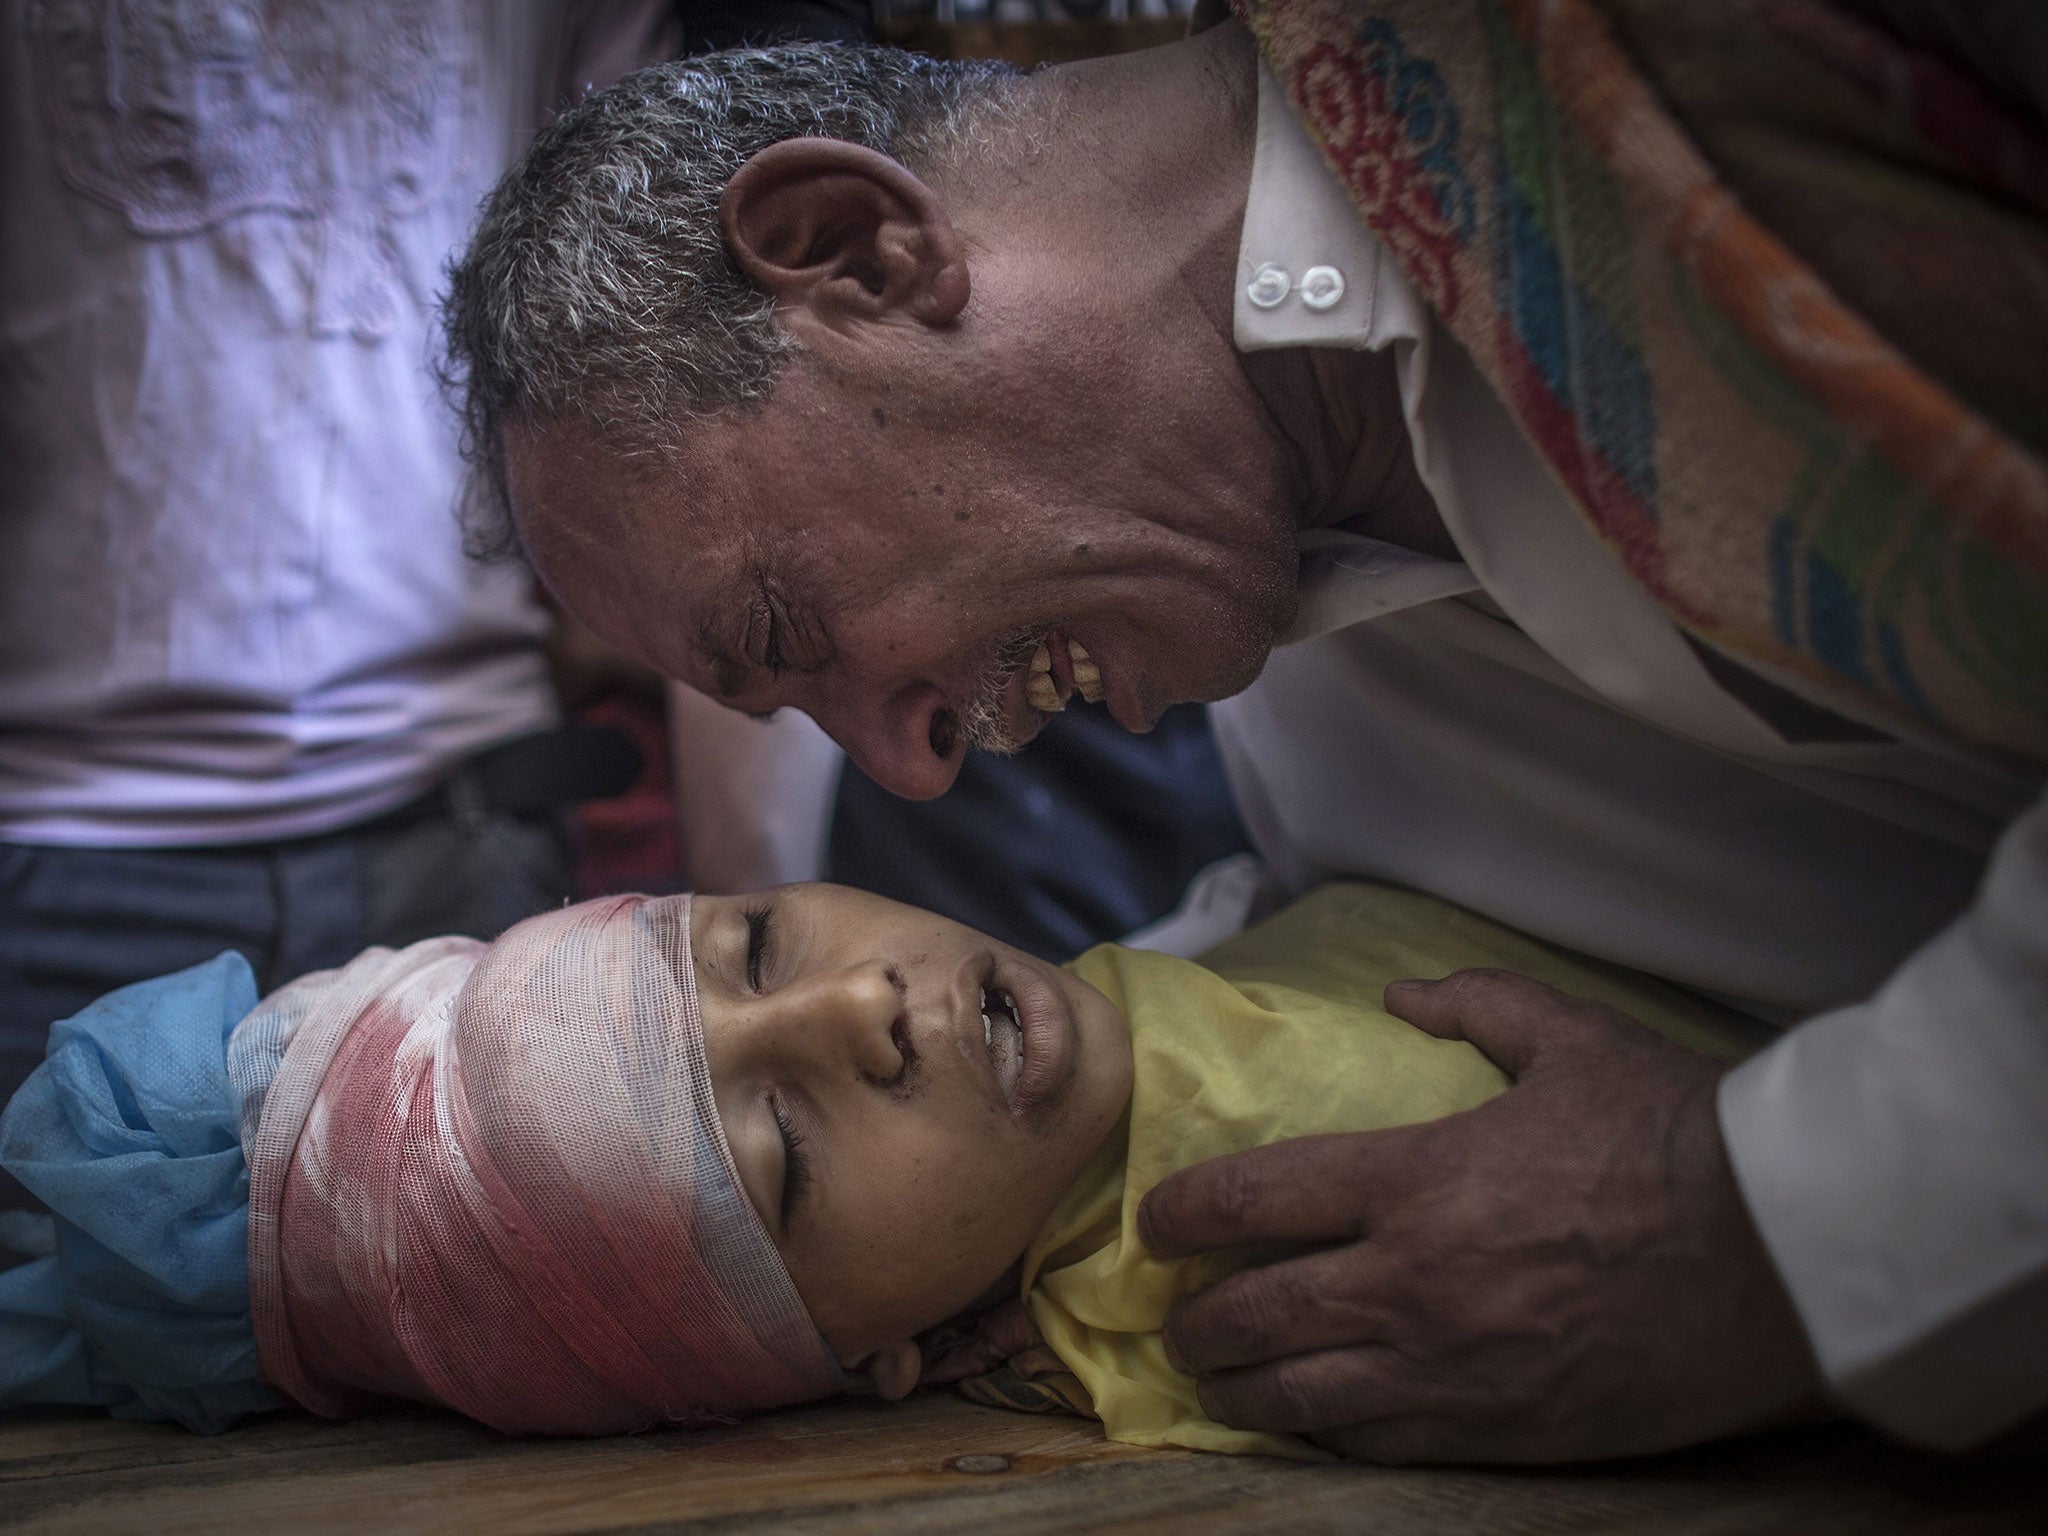 The father of 10-year-old Ibraheem al-Dawawsa cries over the dead body of his son in Gaza City